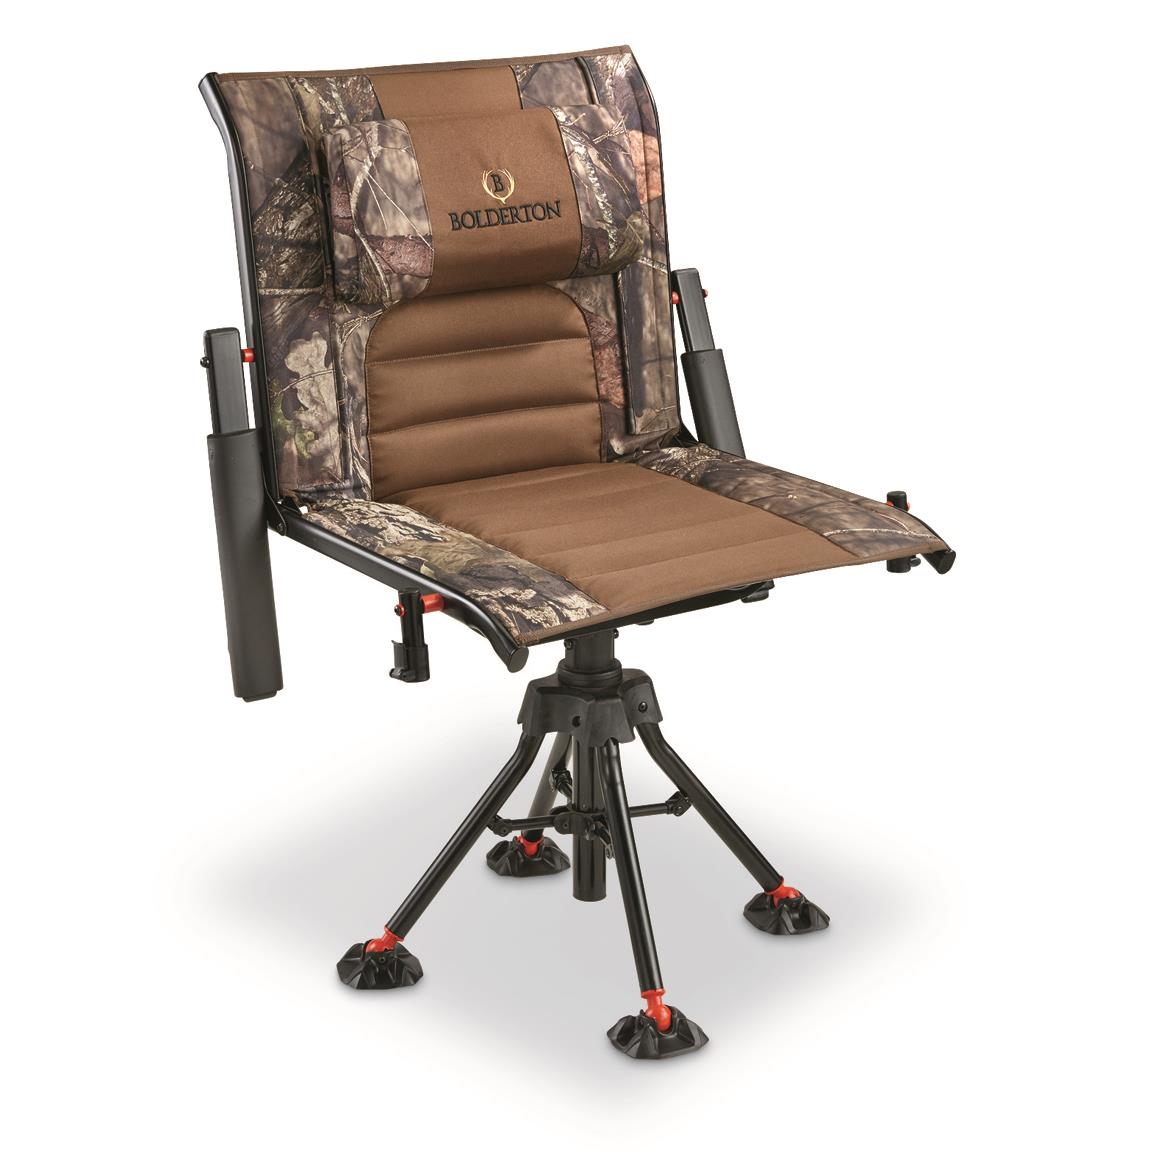 Guide Gear Oversized Club Camp Chair, 500-lb. Capacity - 703611